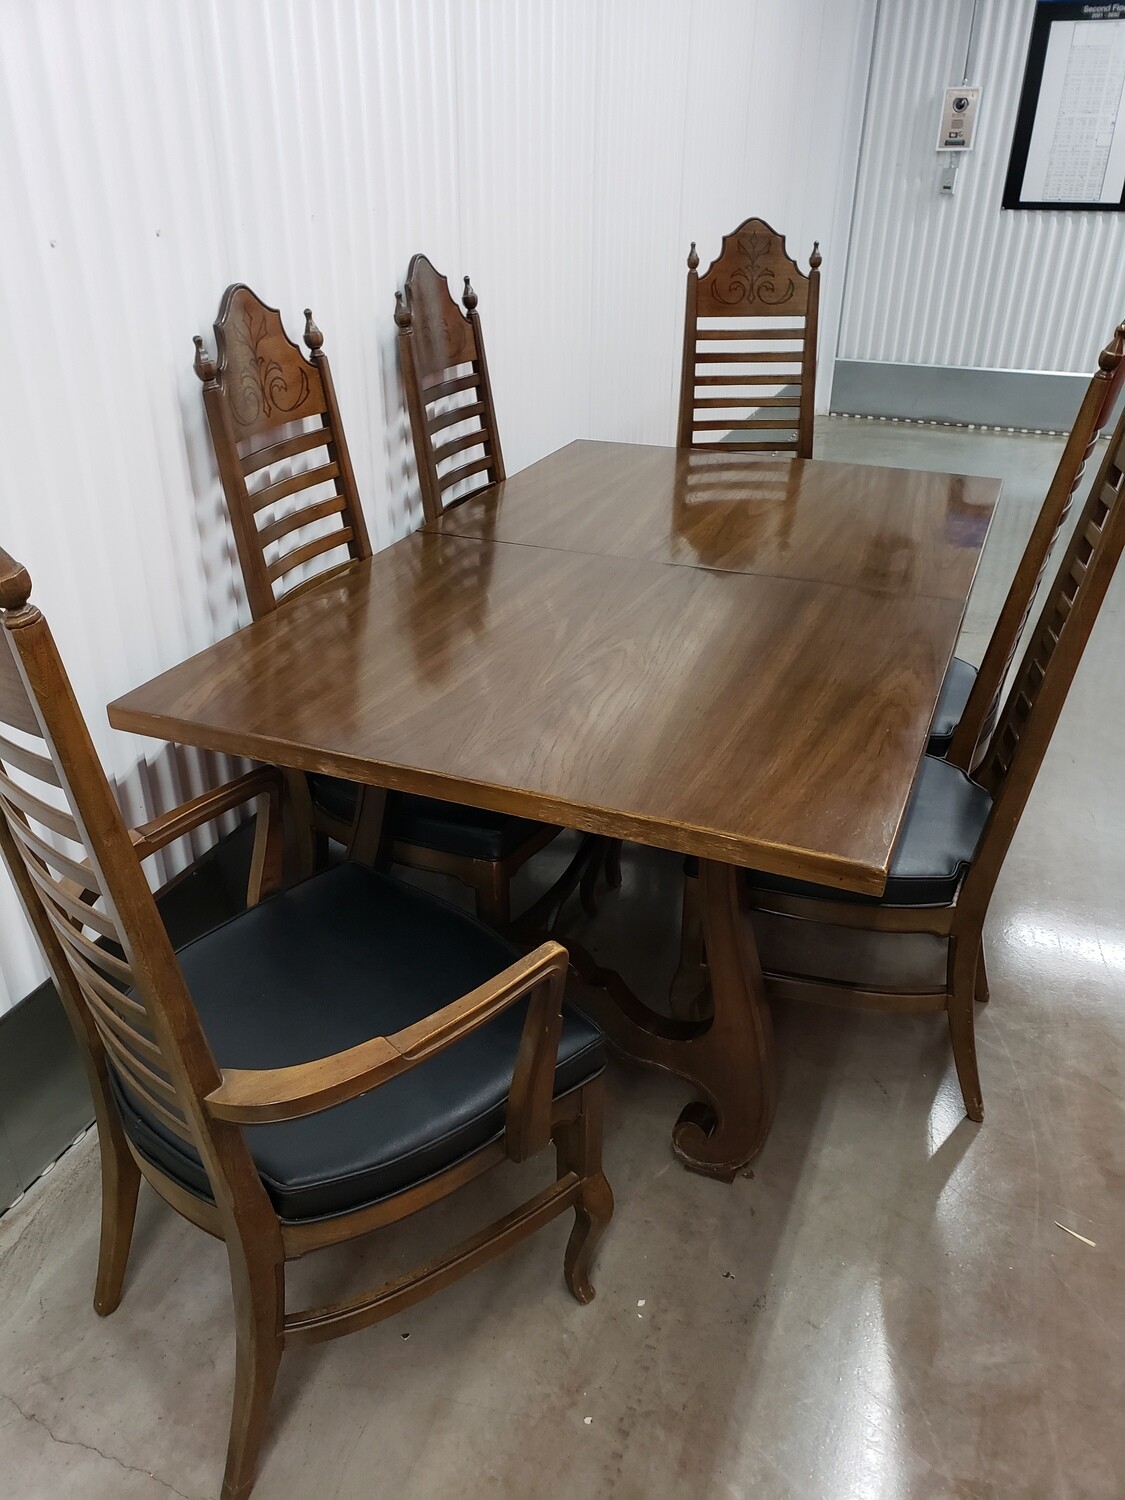 Large Dining Table, opens to 8'8" #1365